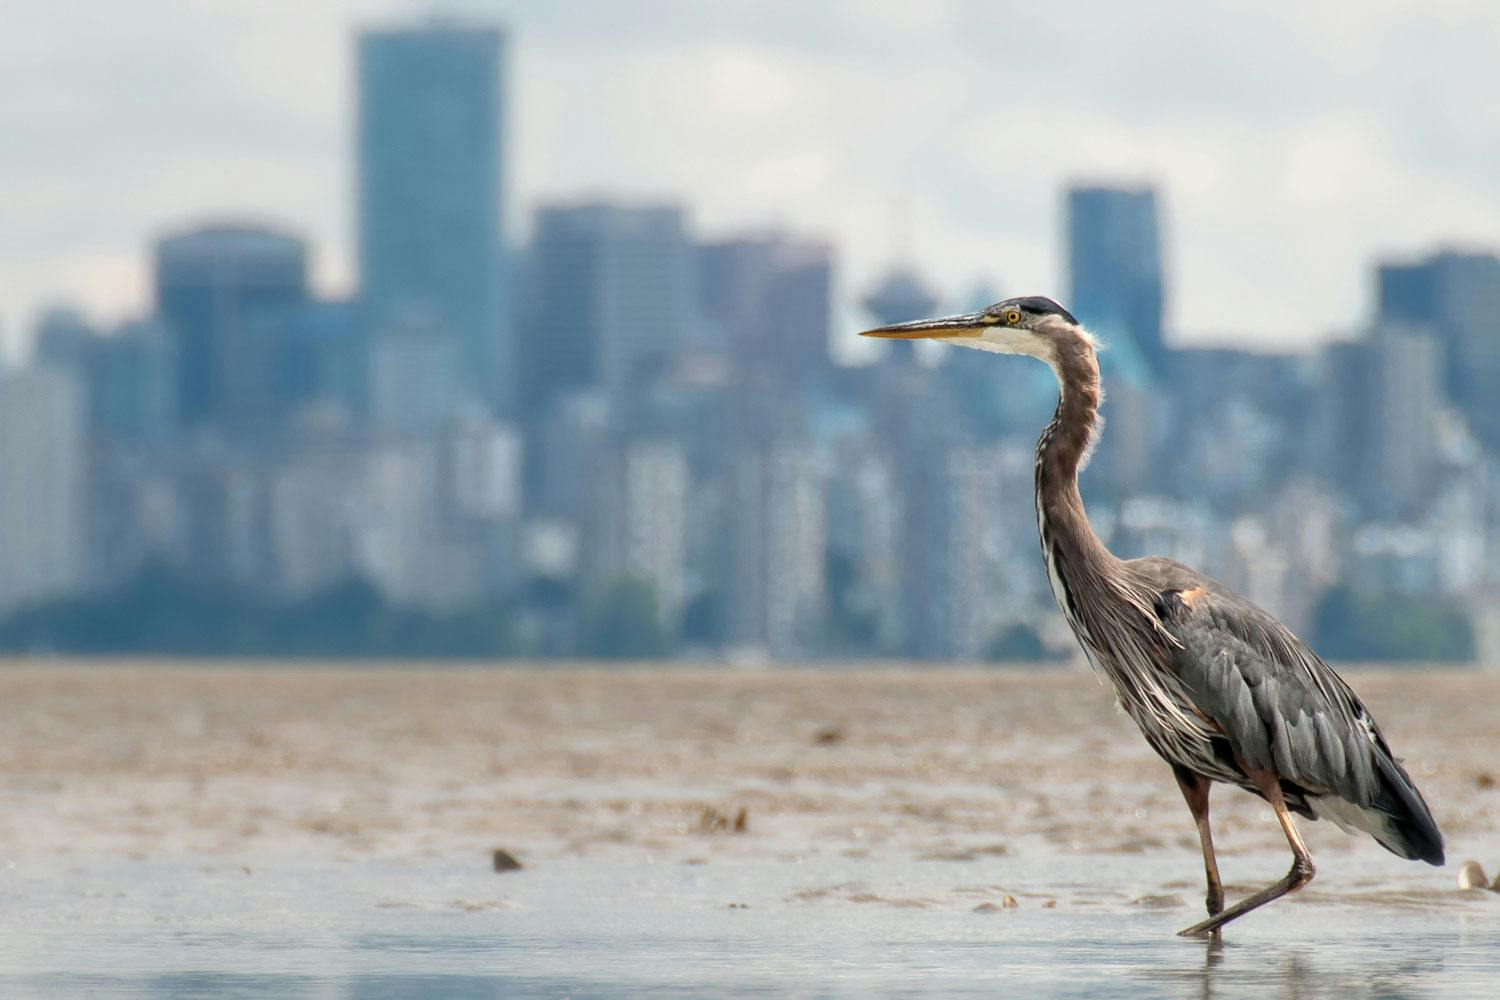 A great blue heron—a long-necked bird with a long narrow beak—treads in muddy water, the Vancouver skyline in the background.